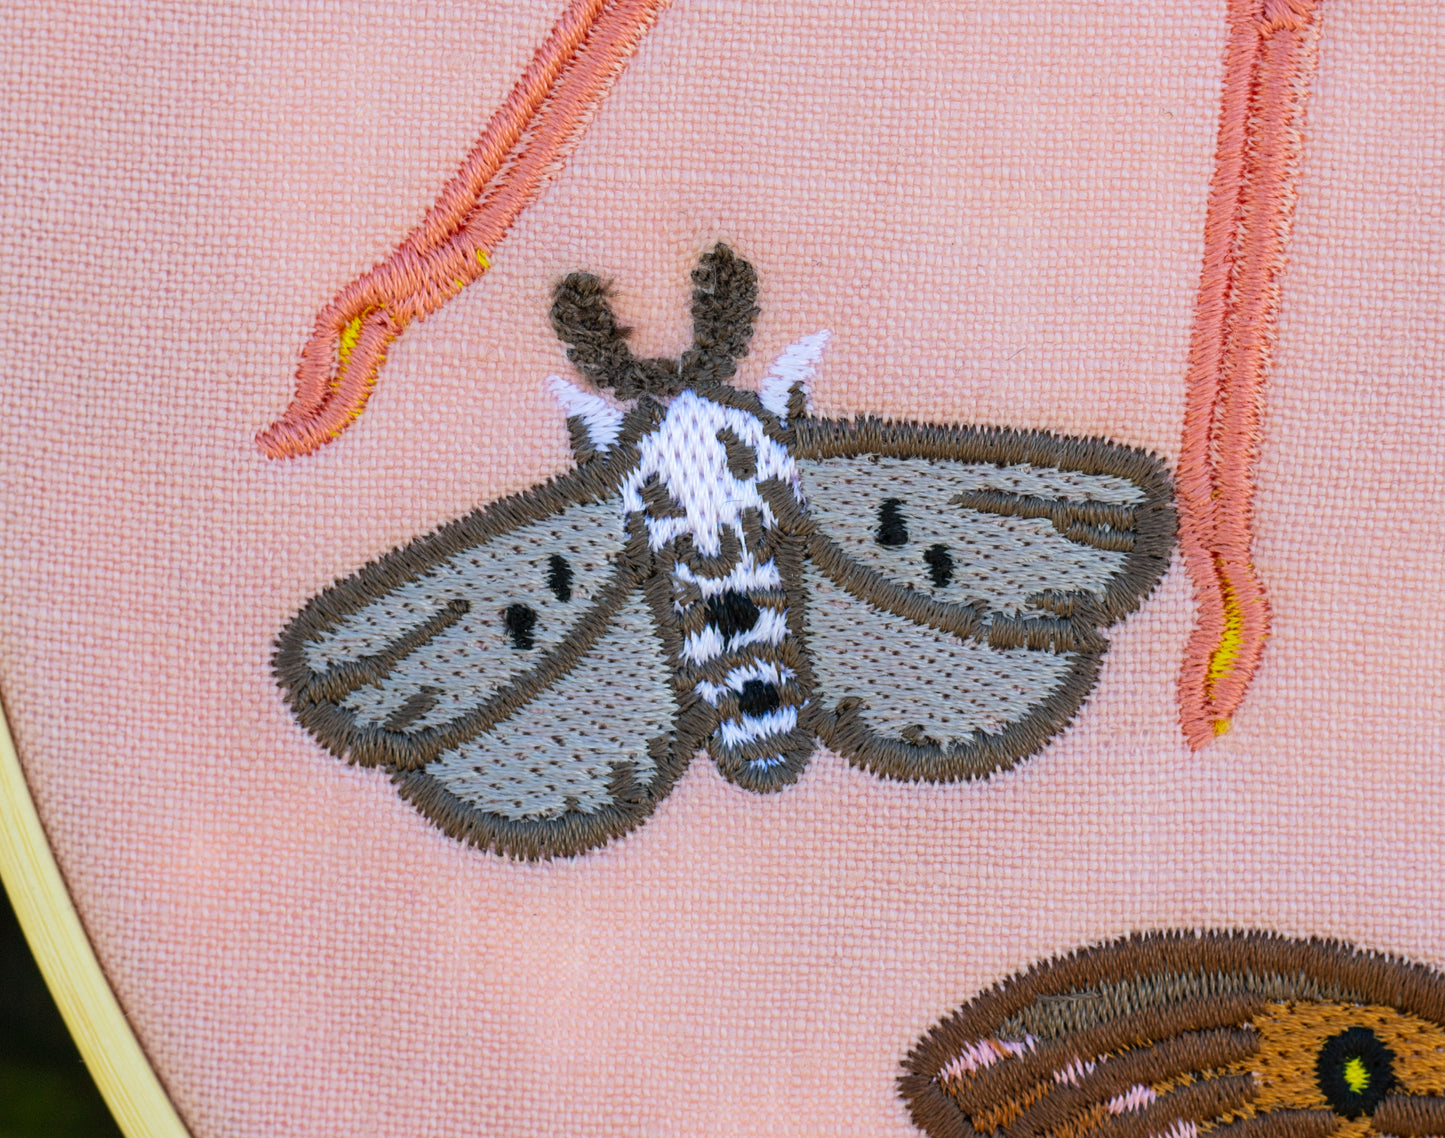 Pastel Moths Embroidered Wall Hanging Hoop!